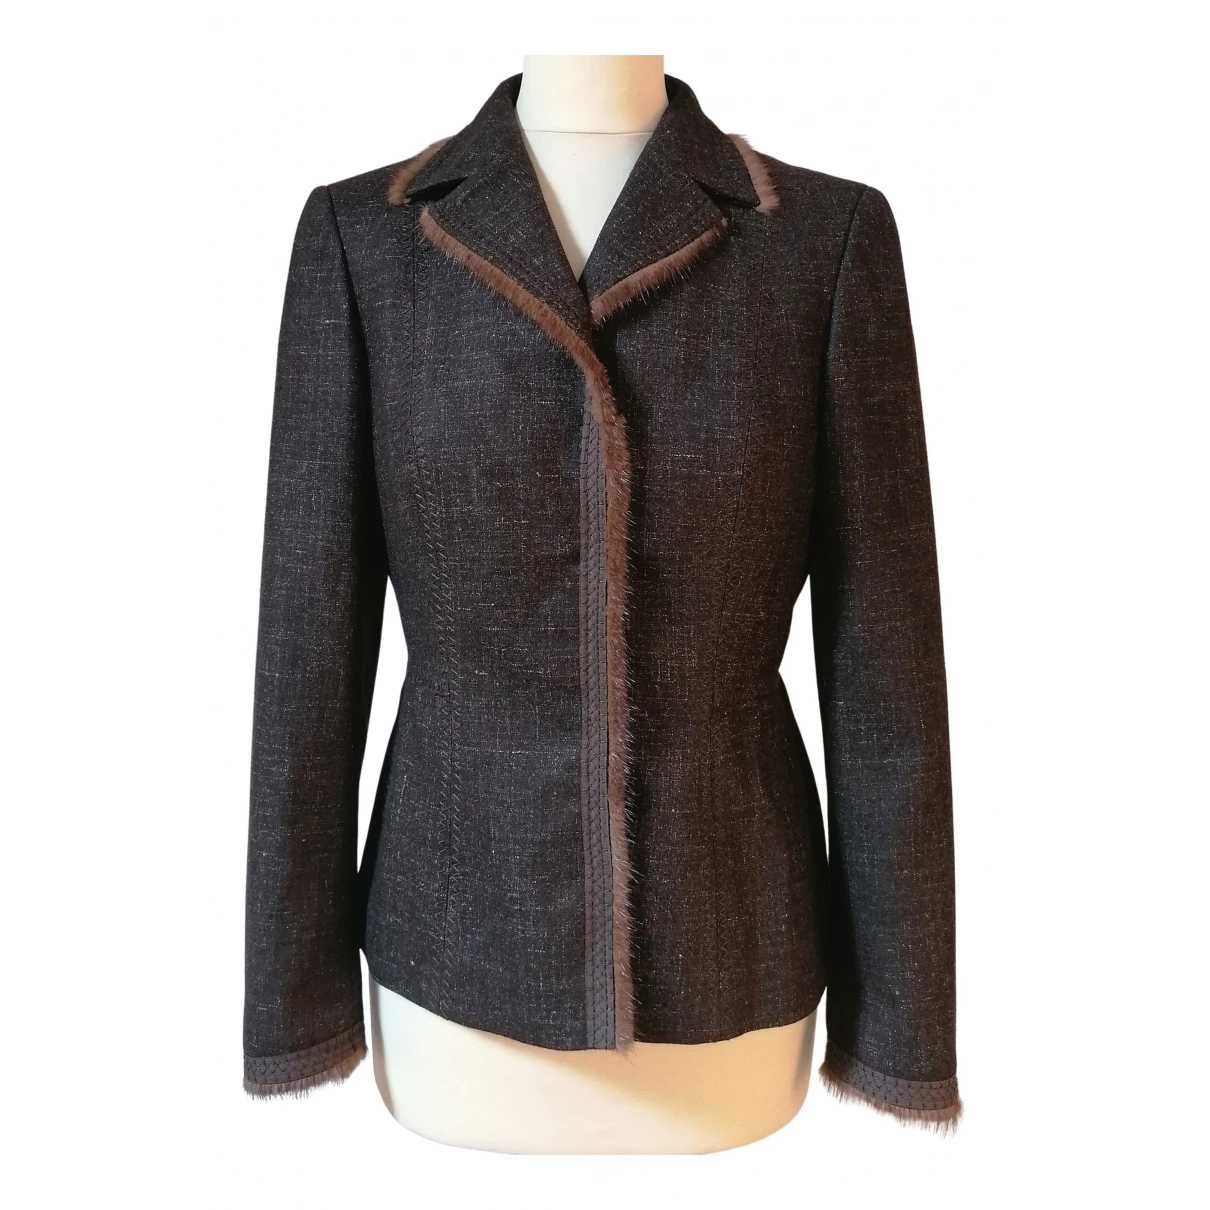 clothing Alberta Ferretti jackets for Female Wool 40 IT. Used condition